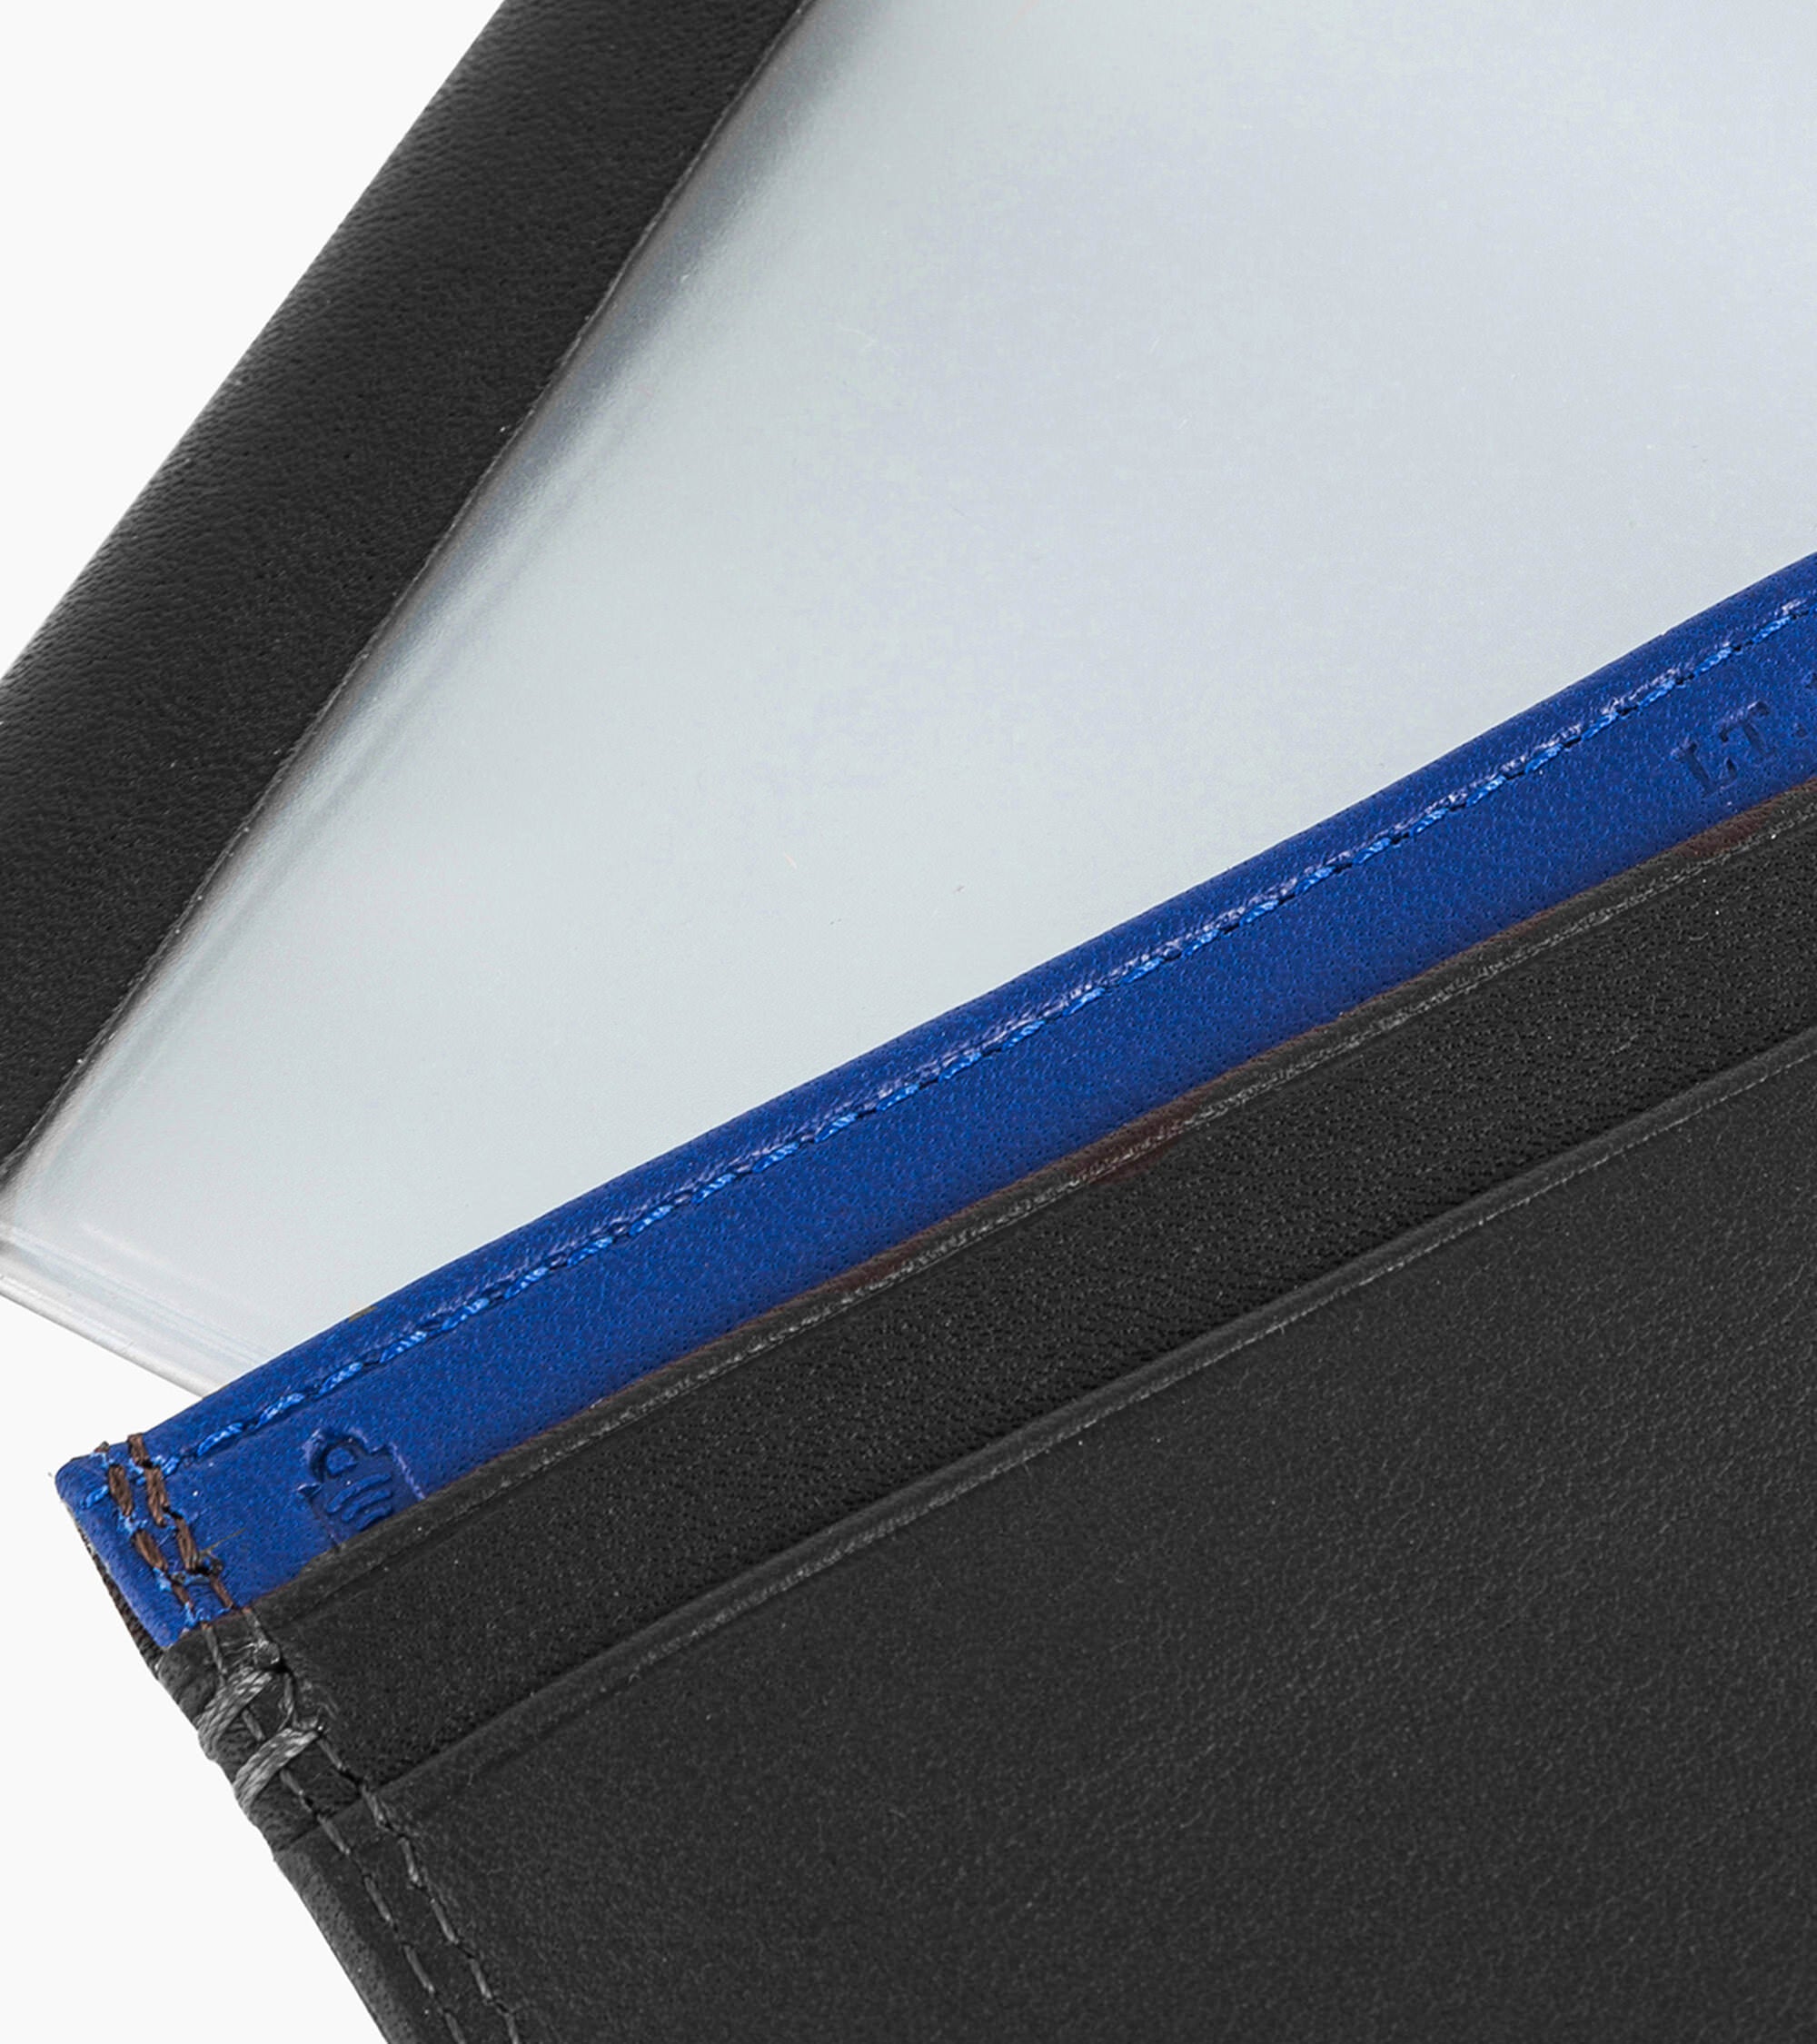 Martin car documents holder in smooth leather